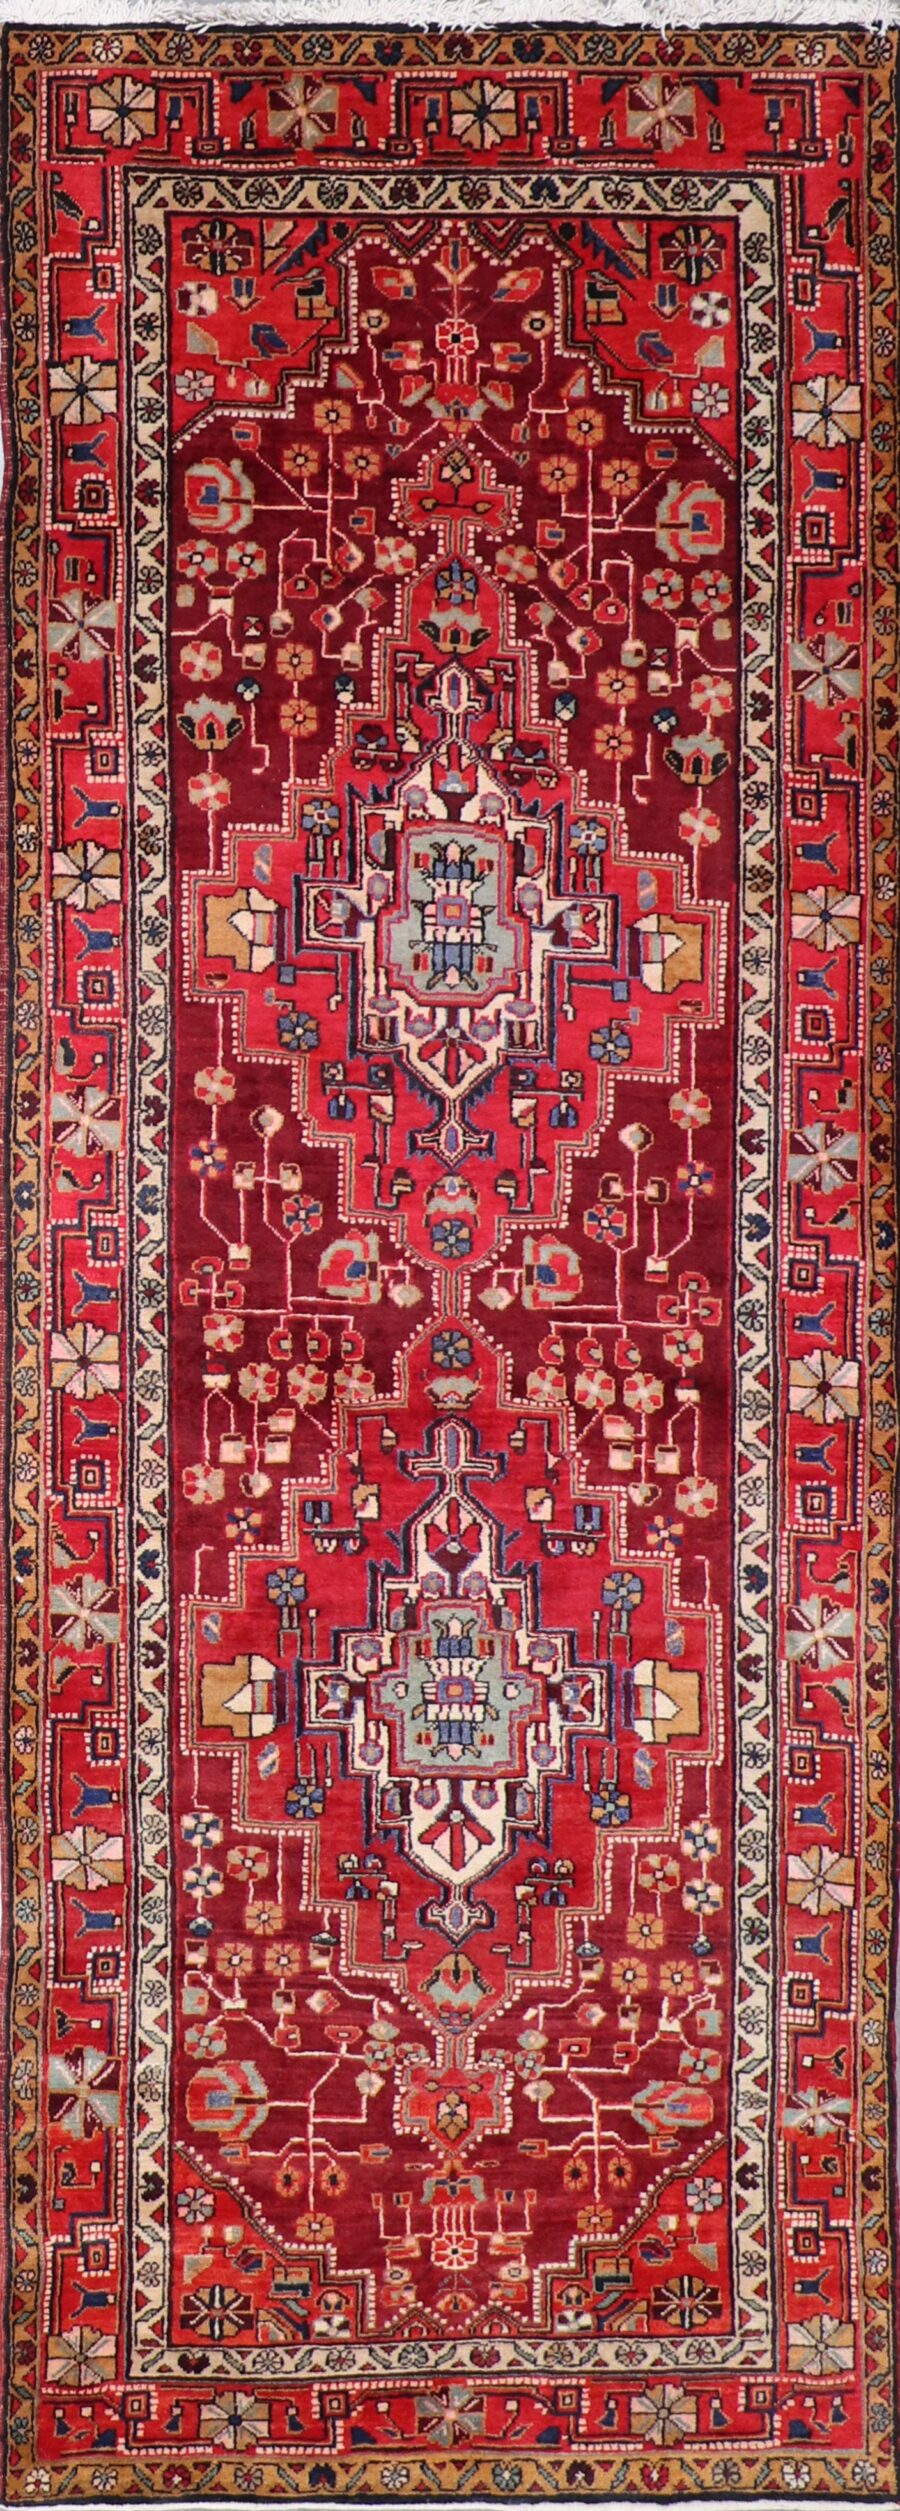 3’9”x10’10” Traditional Persian Red & Tan Wool Hand-Knotted Rug - Direct Rug Import | Rugs in Chicago, Indiana,South Bend,Granger